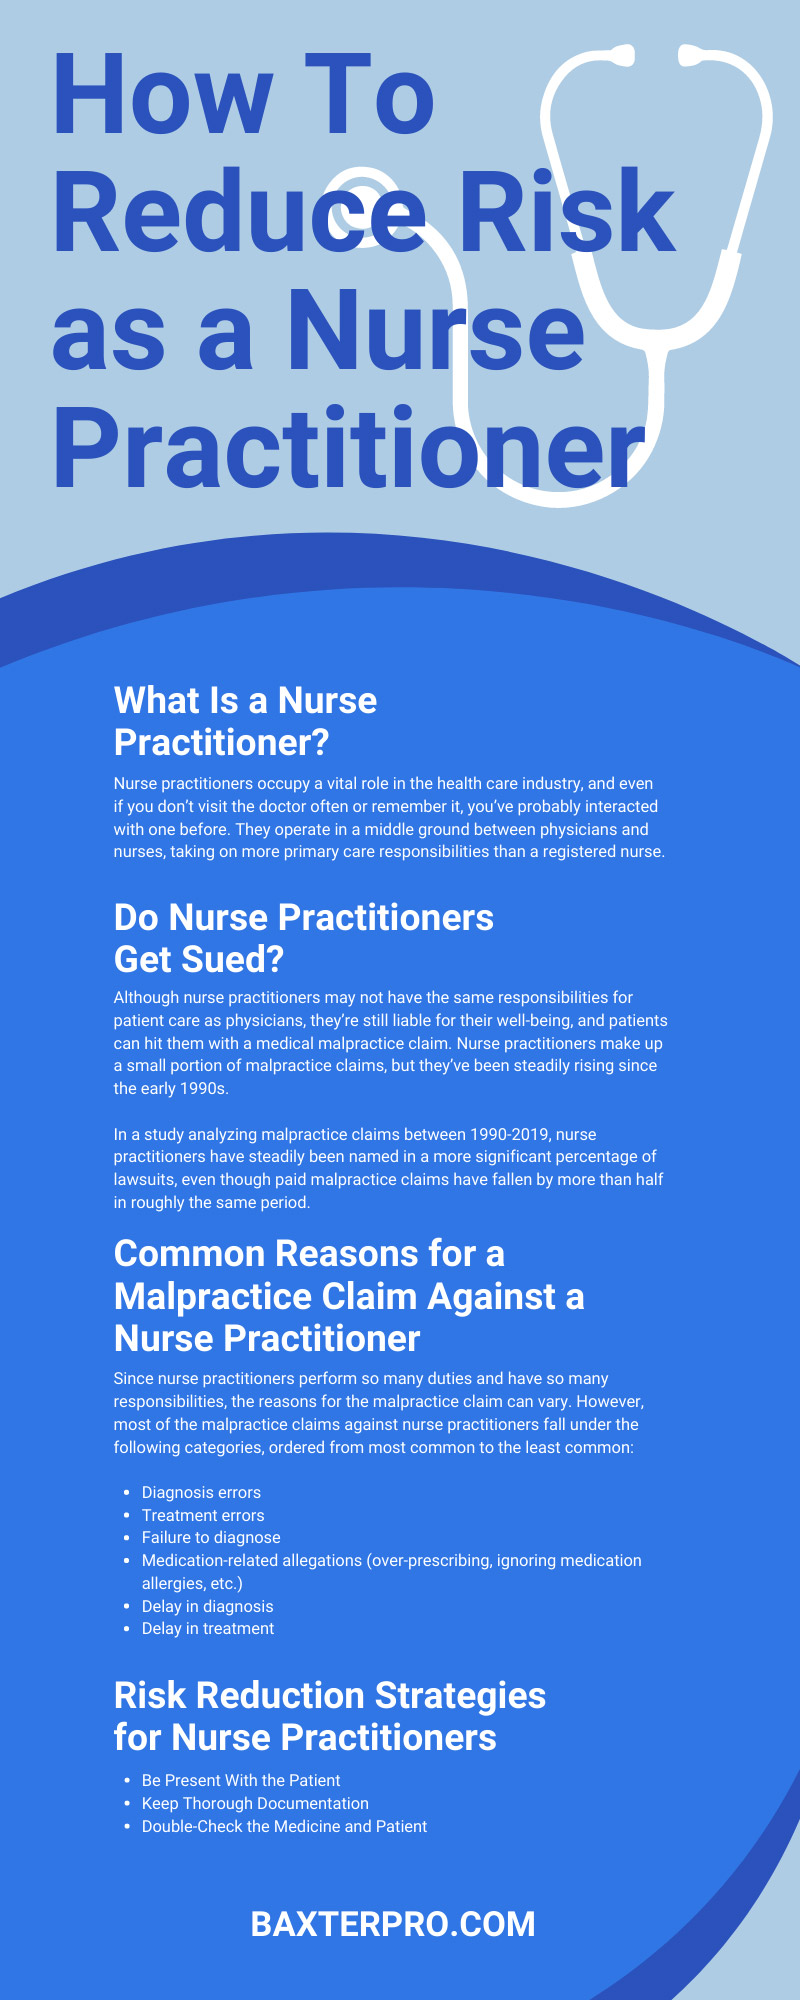 How To Reduce Risk as a Nurse Practitioner